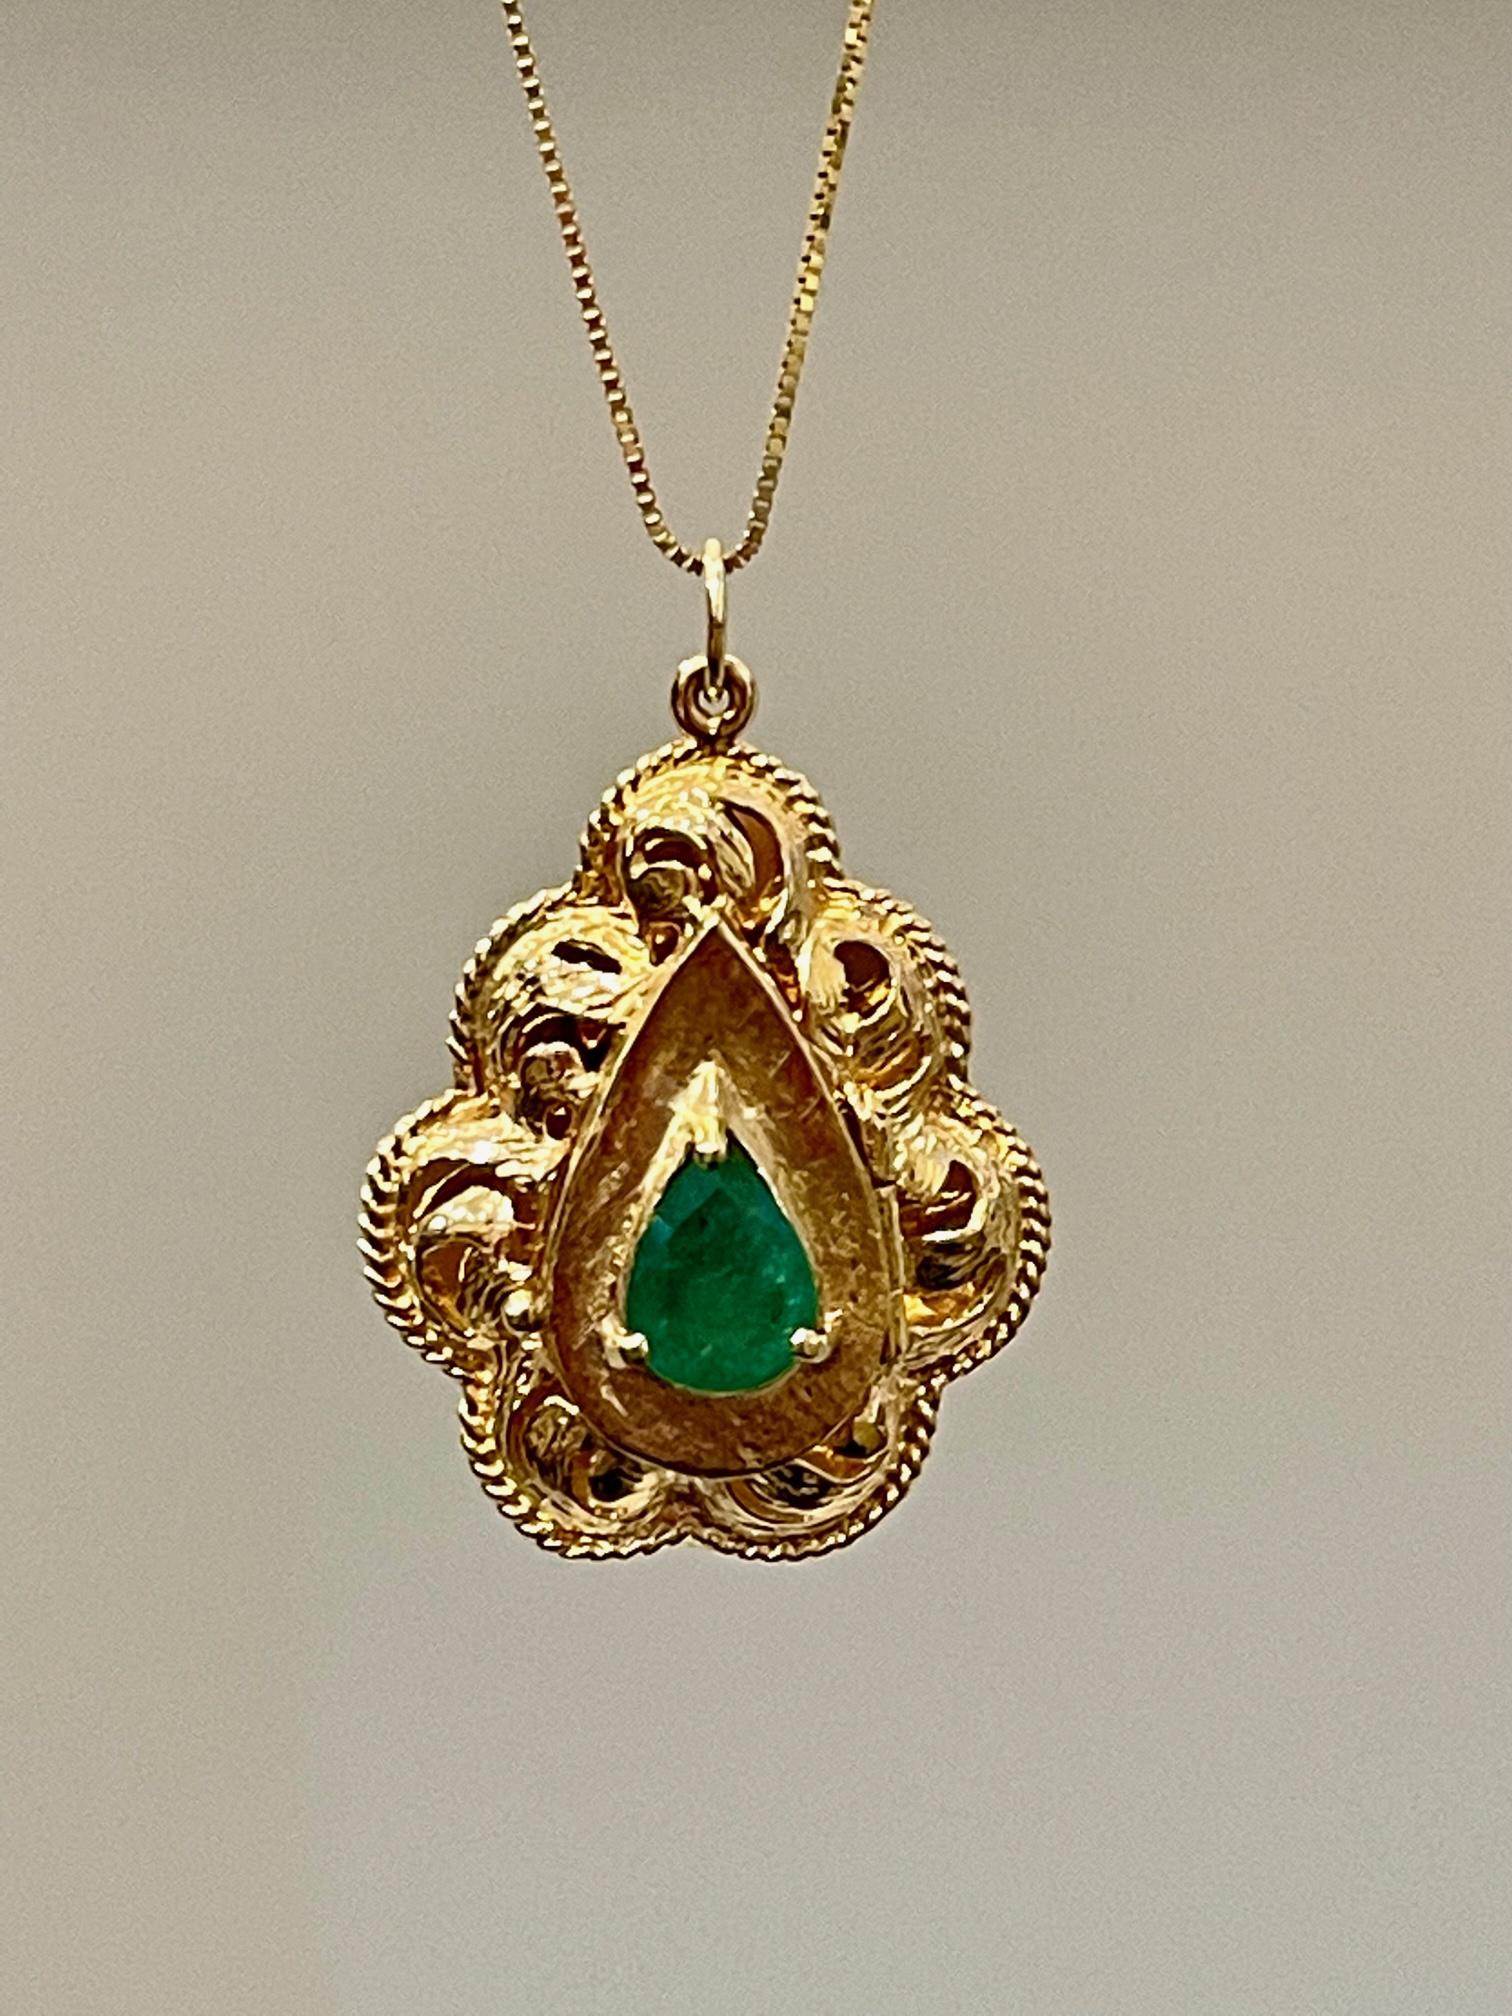 Vintage 14 Karat Yellow Gold 10.5 Gm Chain with Locket and Natural Emerald For Sale 2